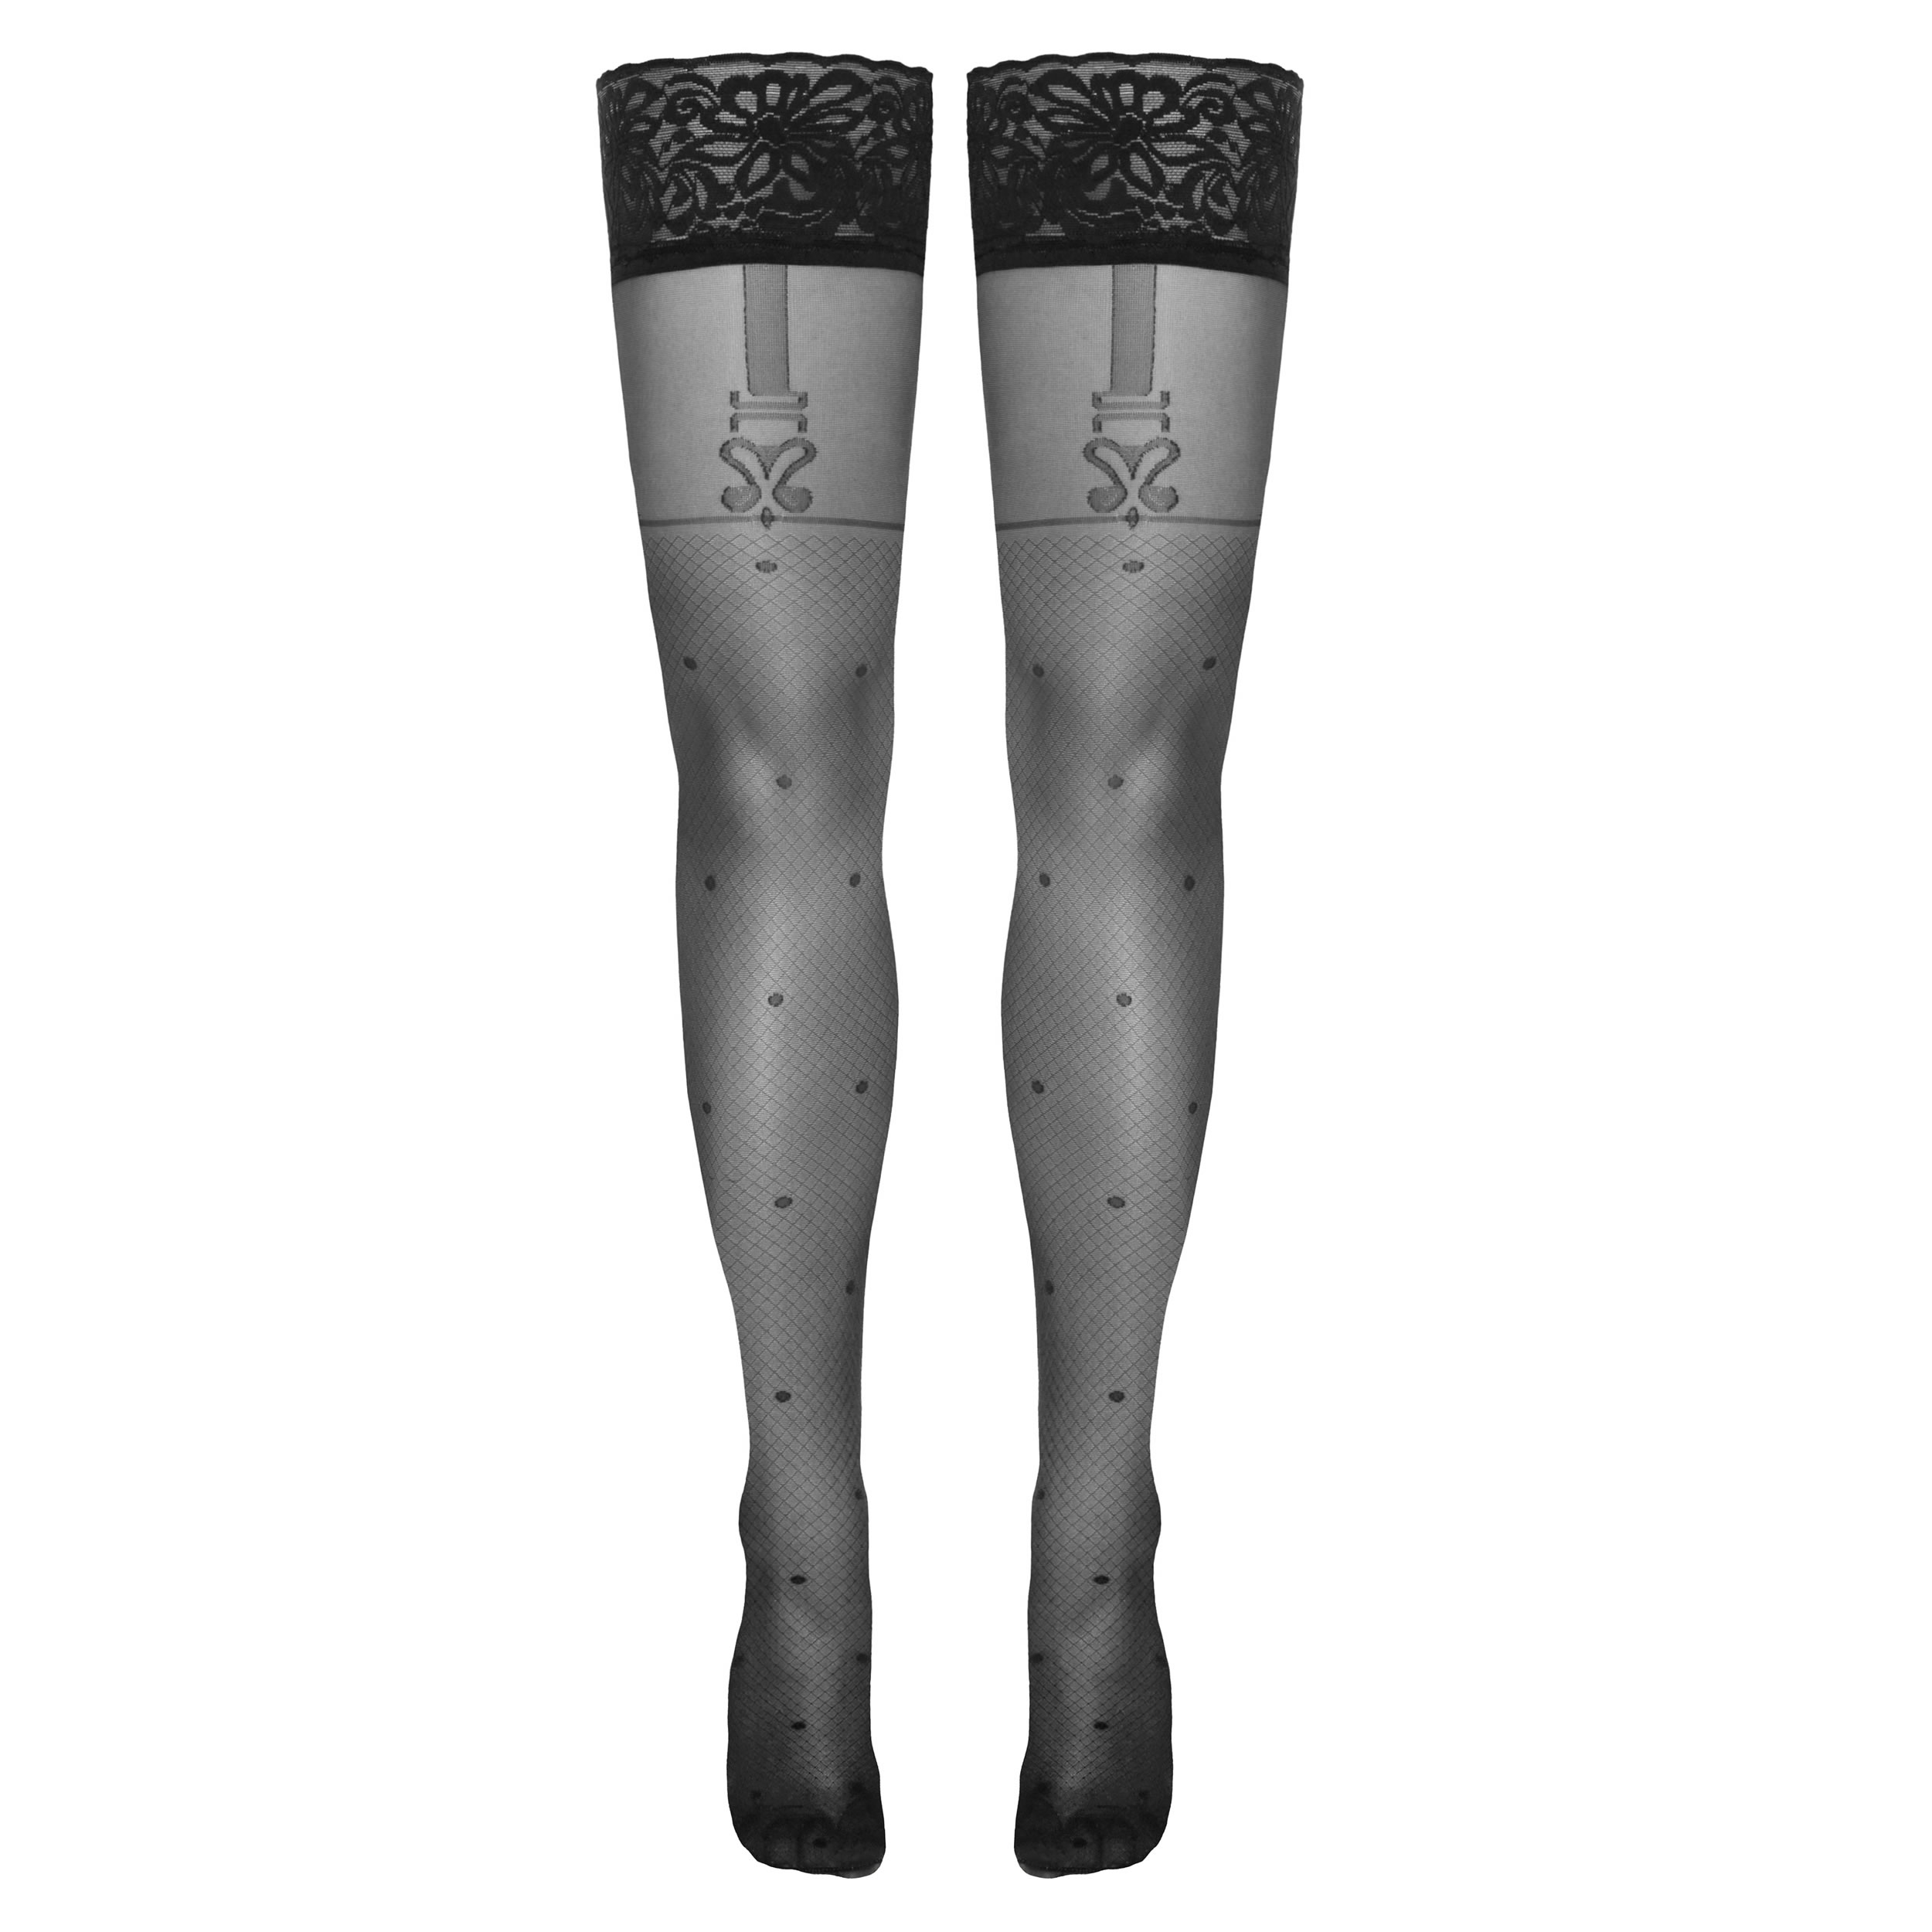 Stay-Up Stockings with Suspender Pattern